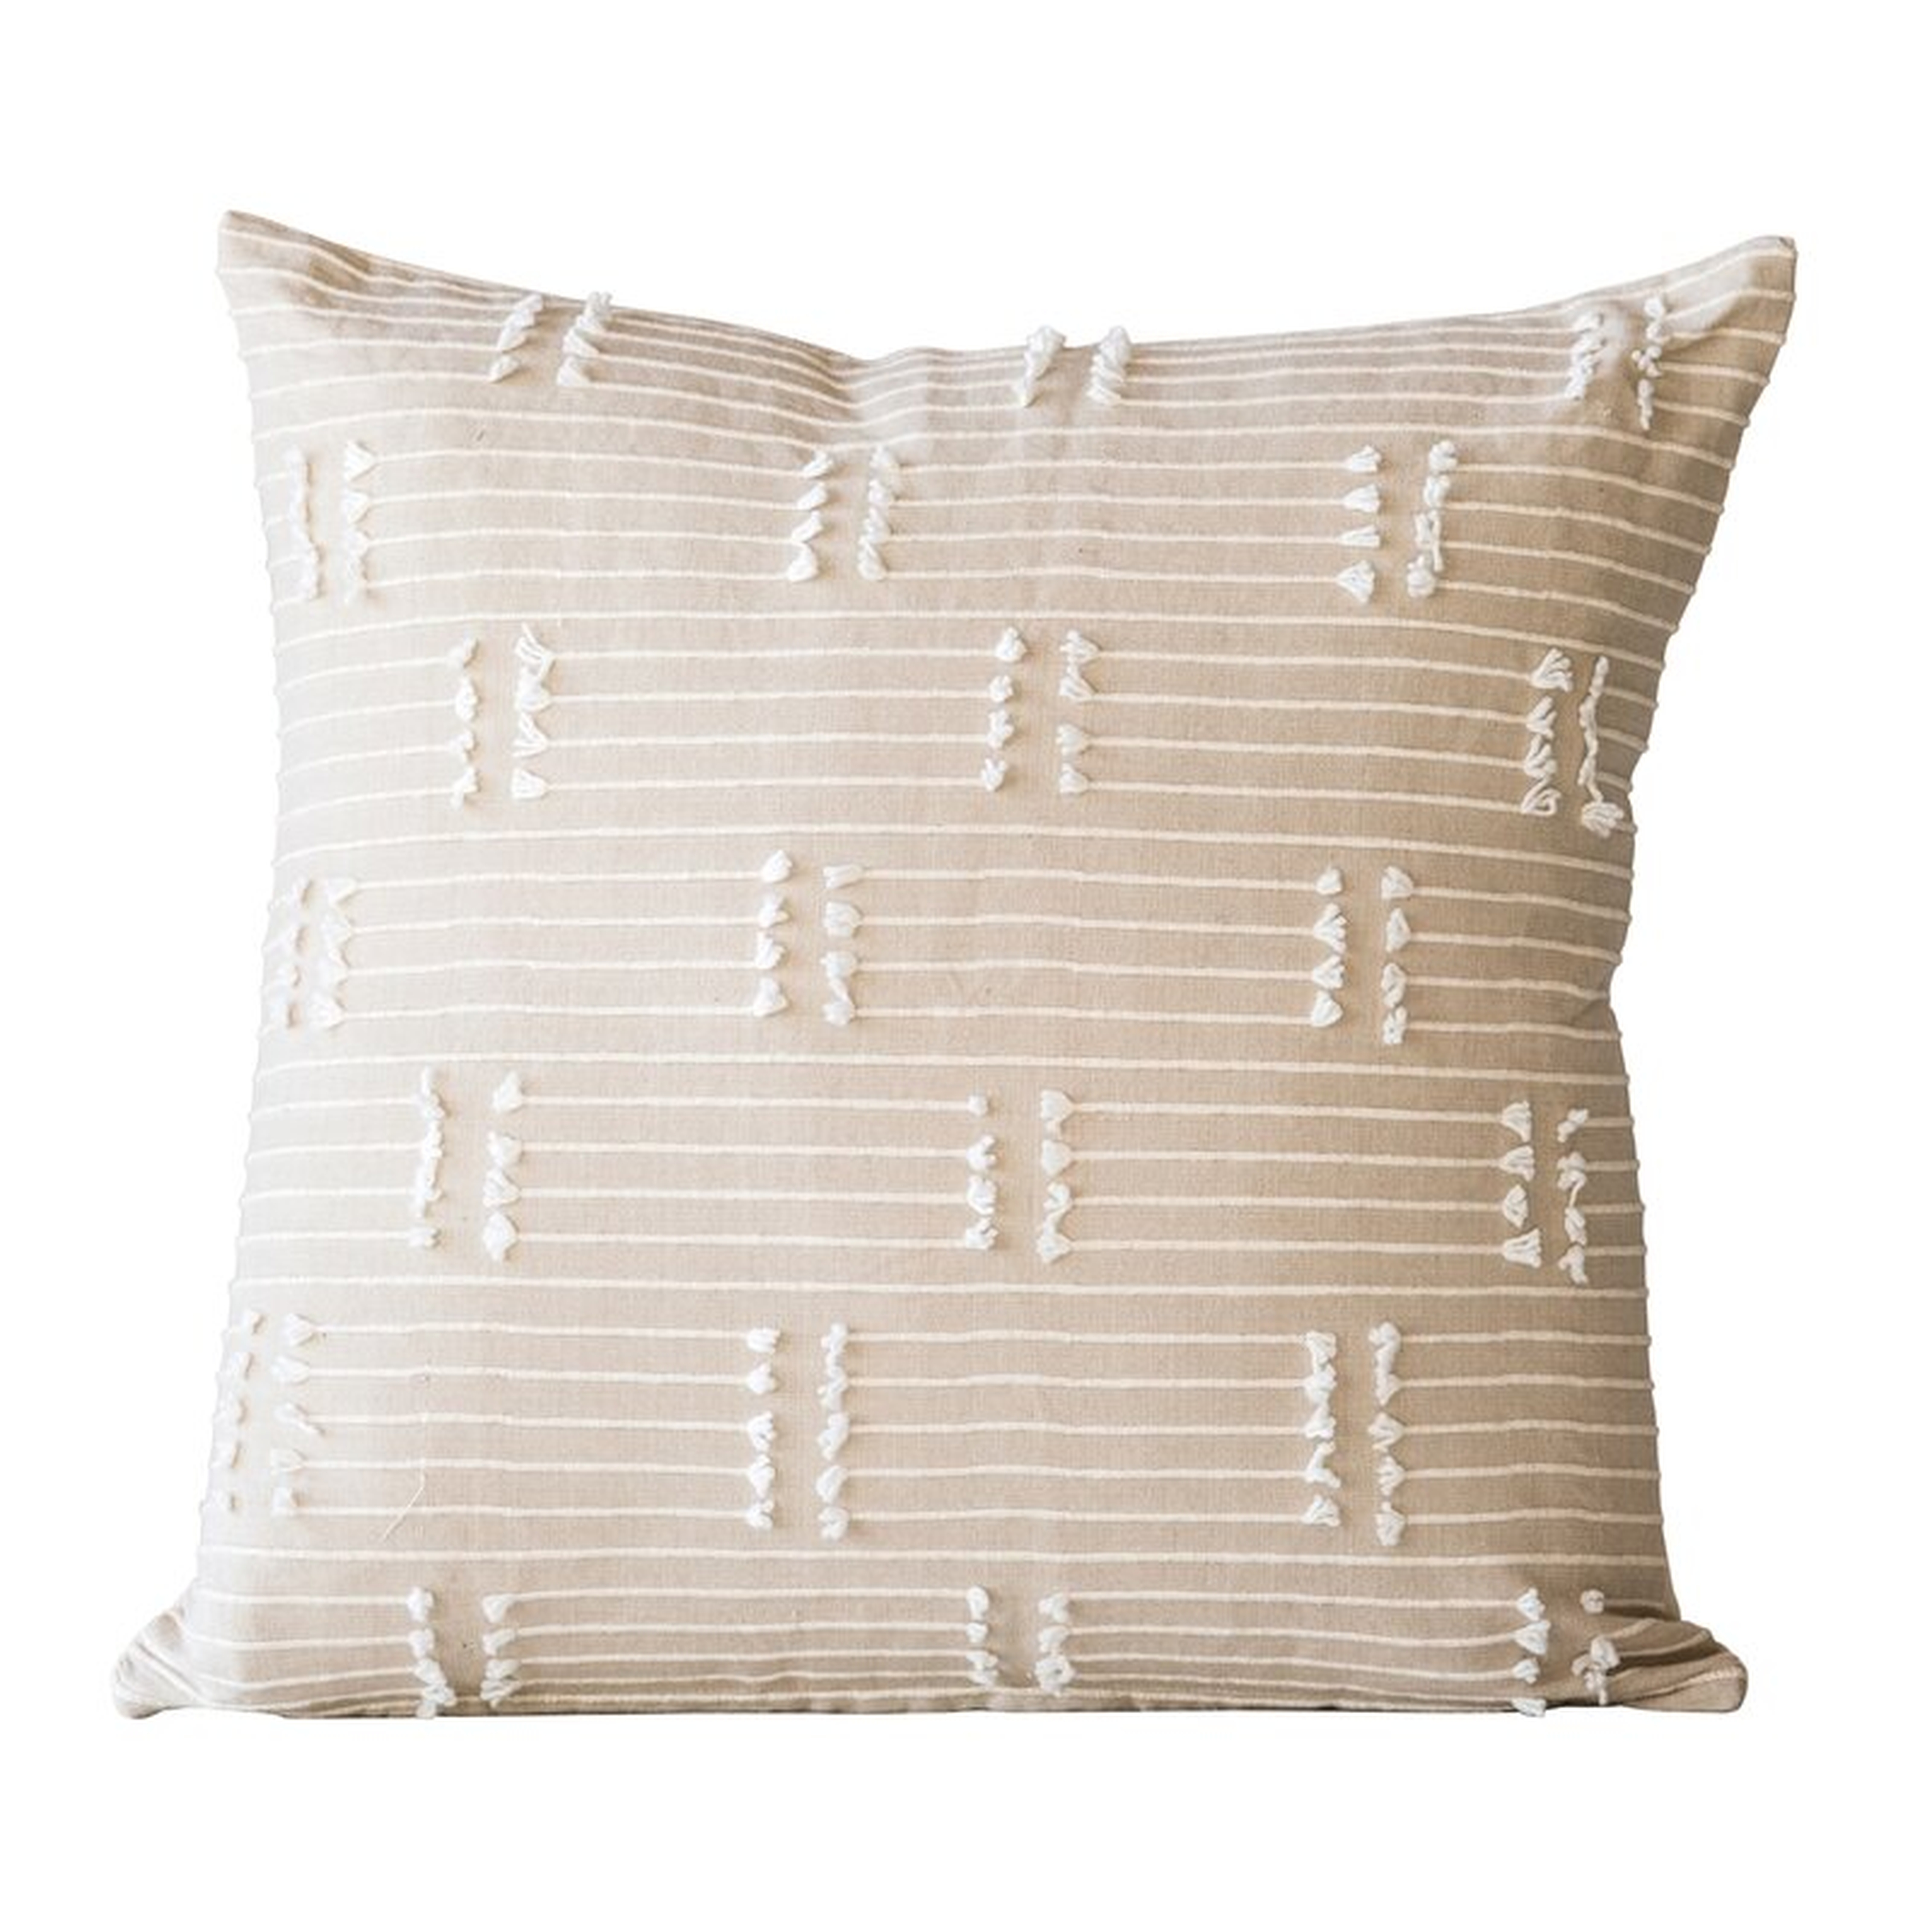 Bloomingville Taupe Square Cotton Woven Pillow With Mini Tassels - Perigold